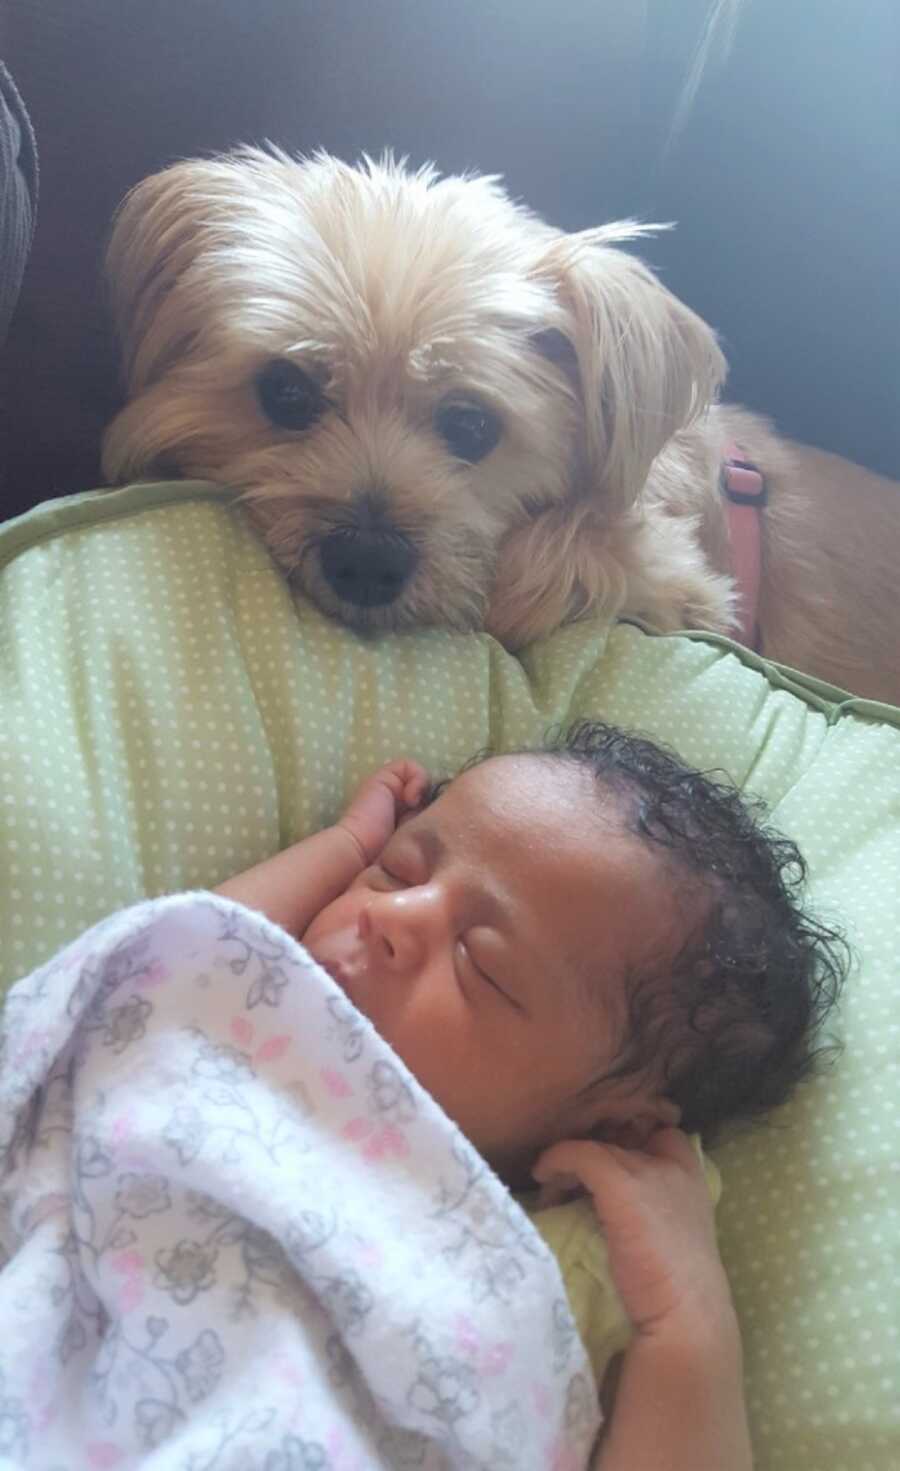 Dog watches over brand new baby girl placed in single mom's foster home.